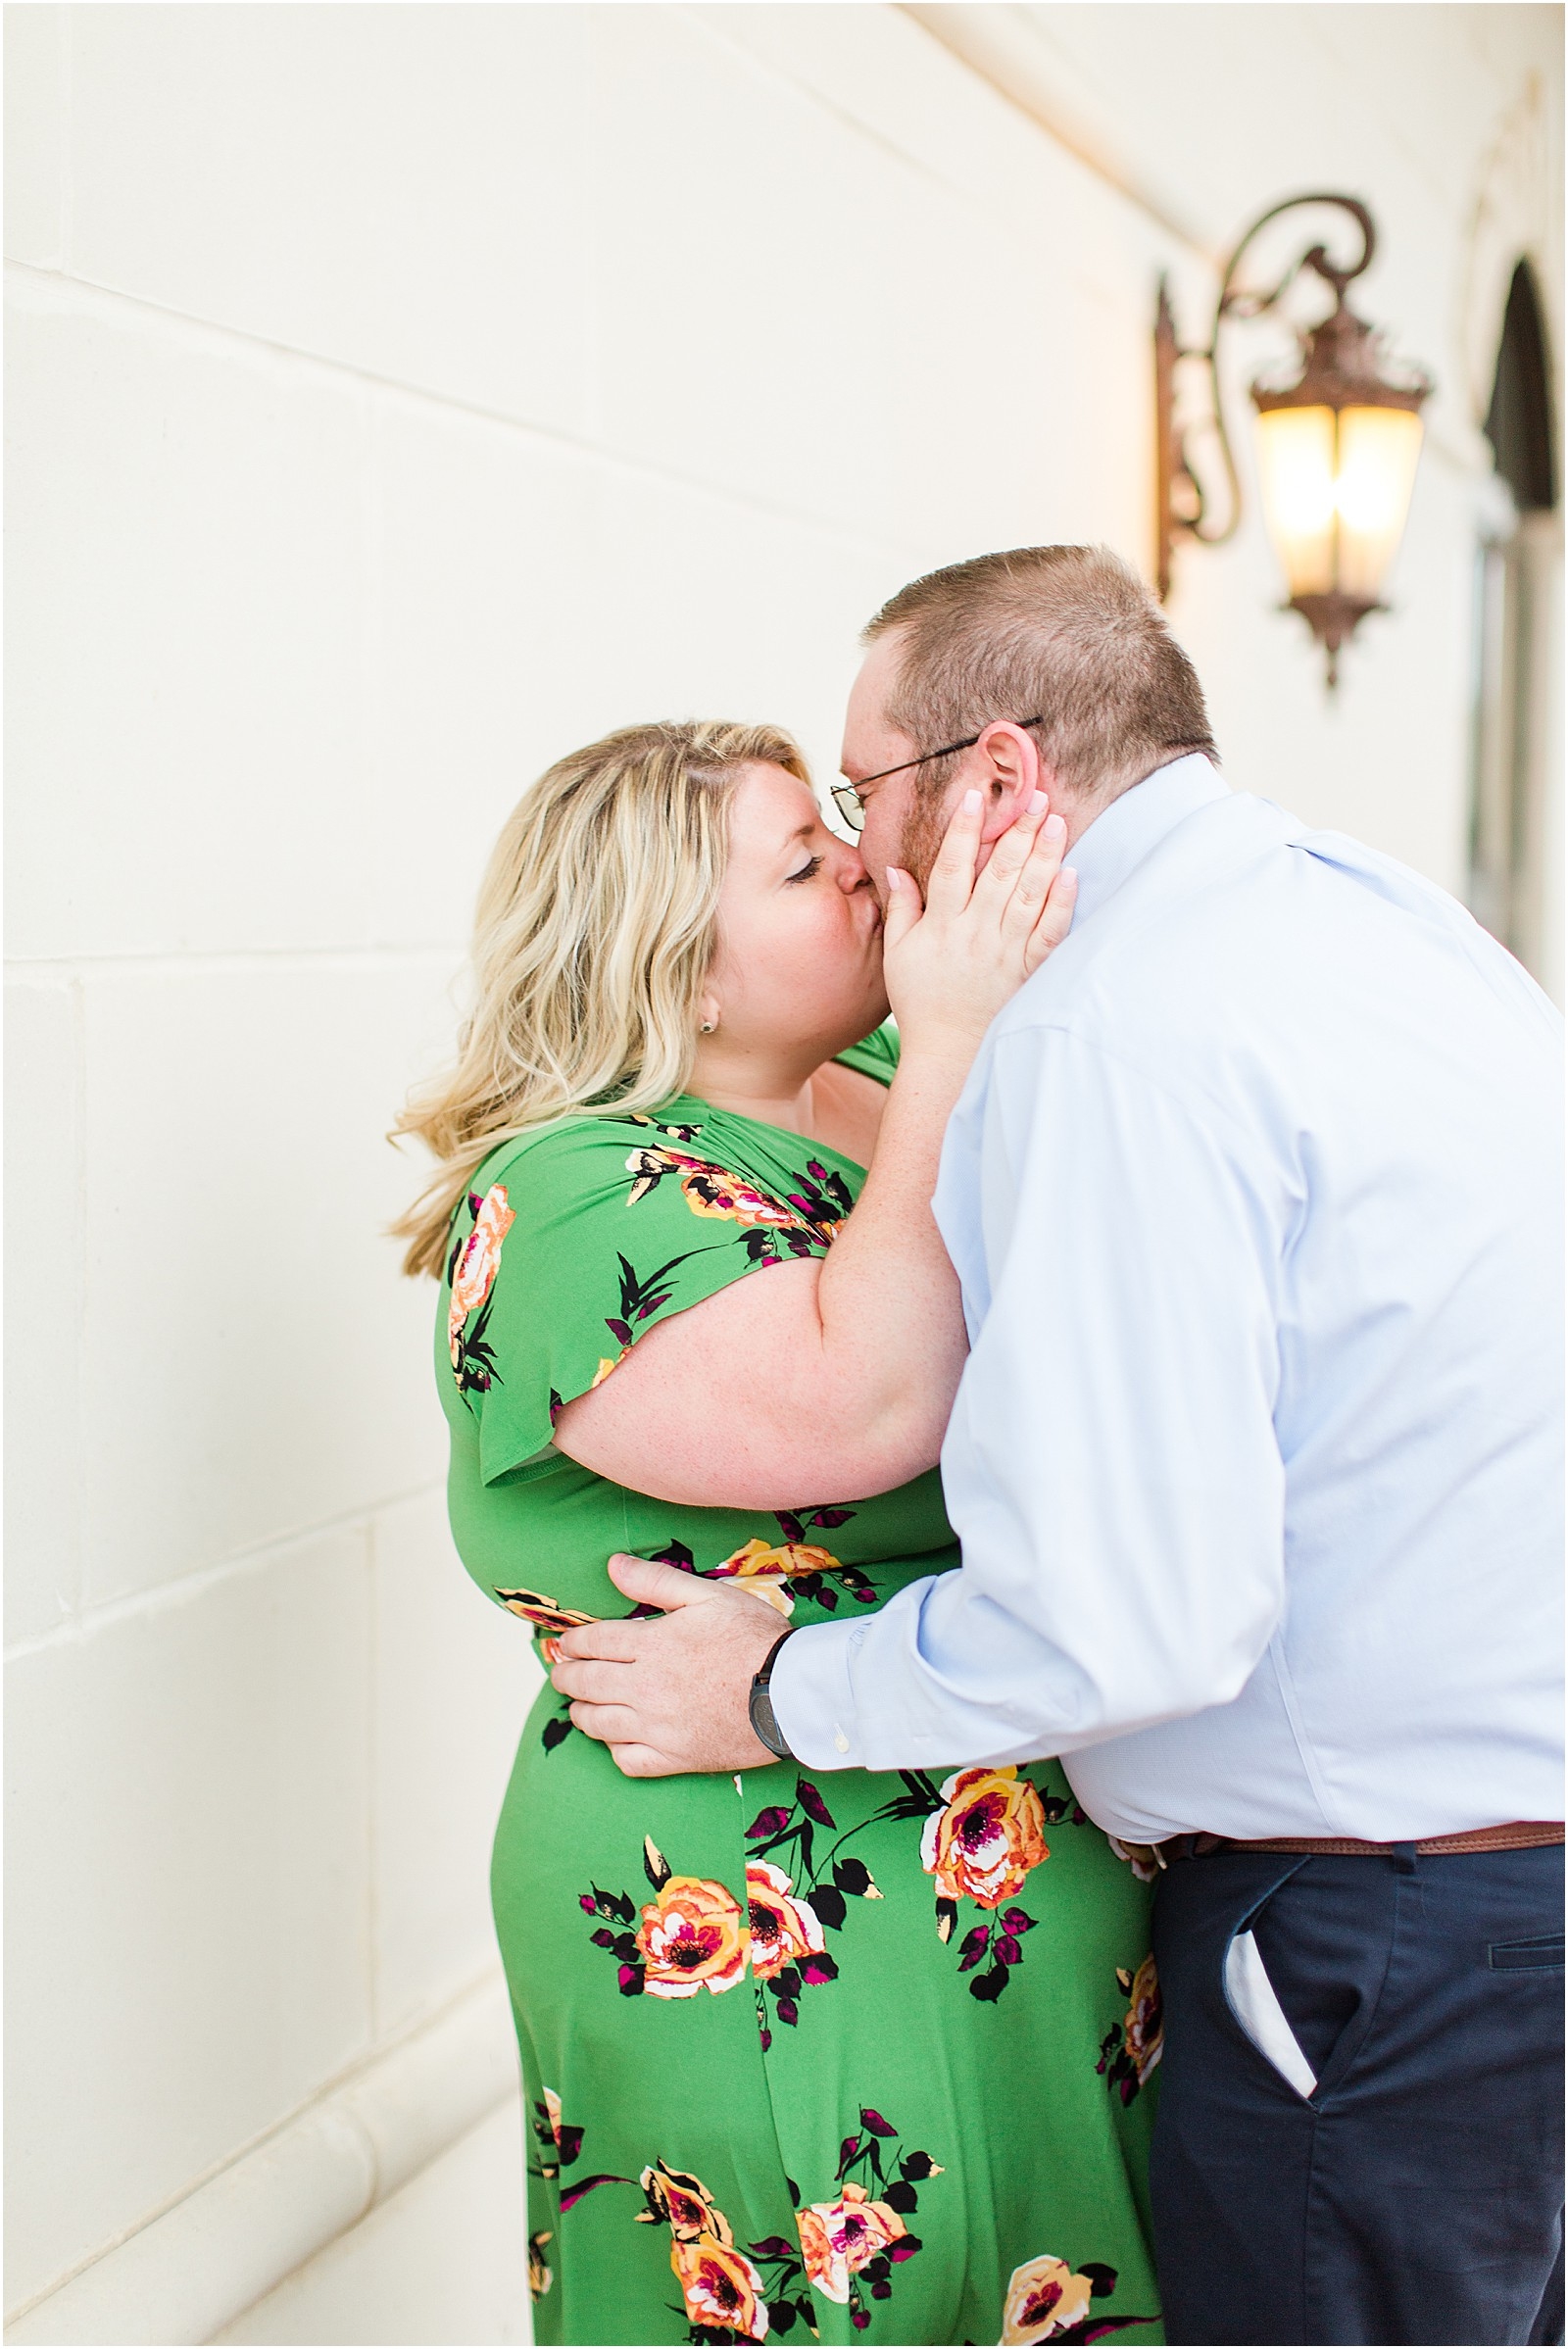 A Downtown Owensboro Engagement Session | Brittany and Neil | Engaged | | 0023.jpg